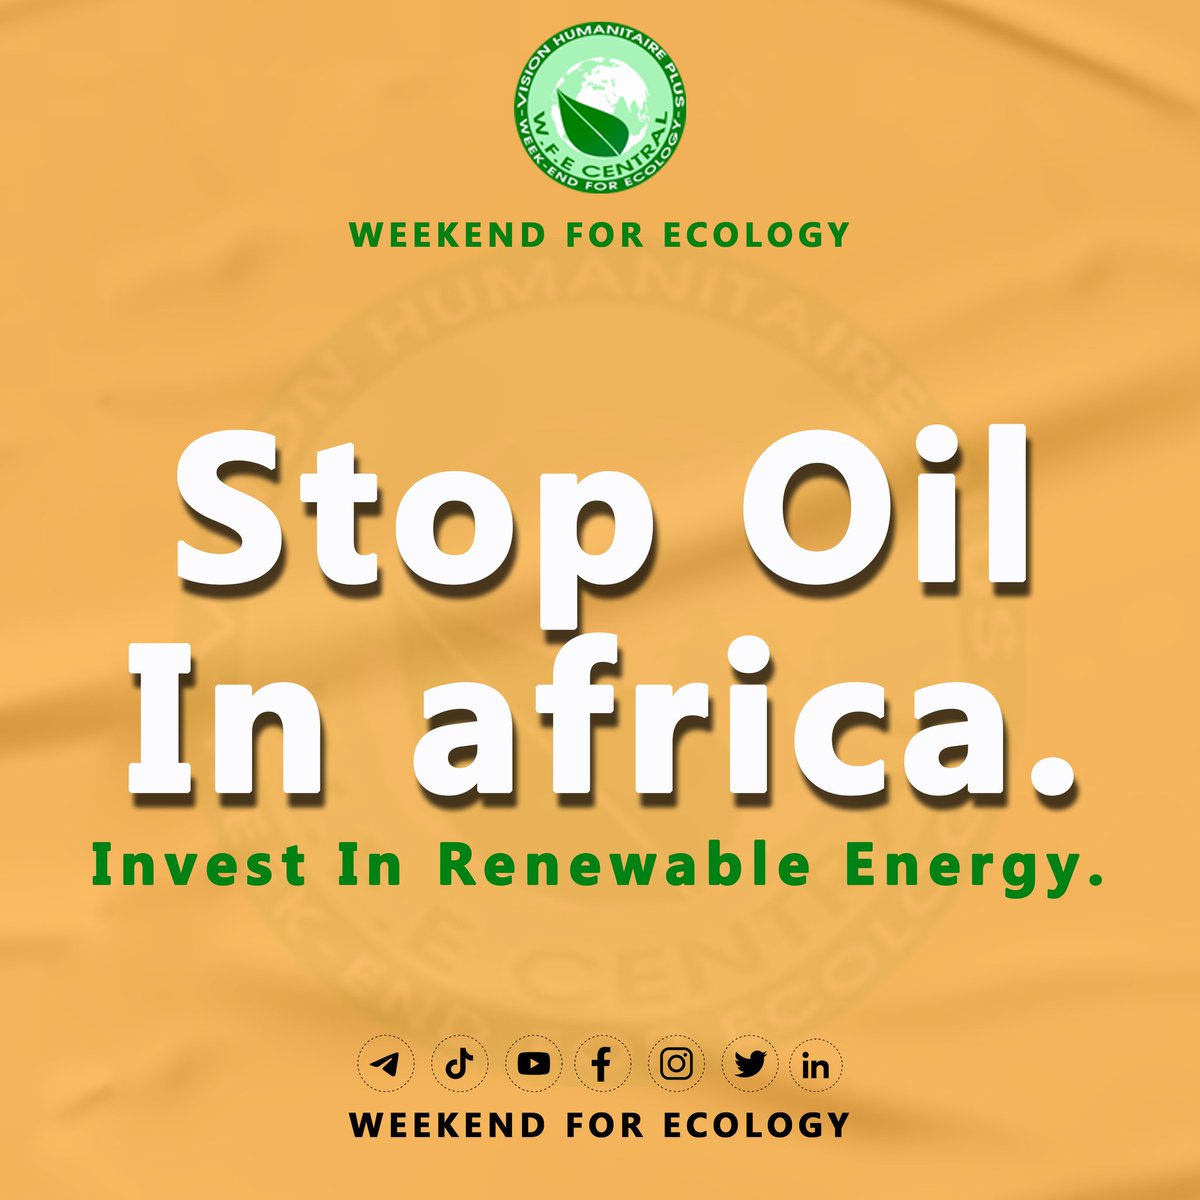 Say no to all new fossil fuel projects in Africa! Africa must lead the renewable energy revolution.
#WeekendForEcology